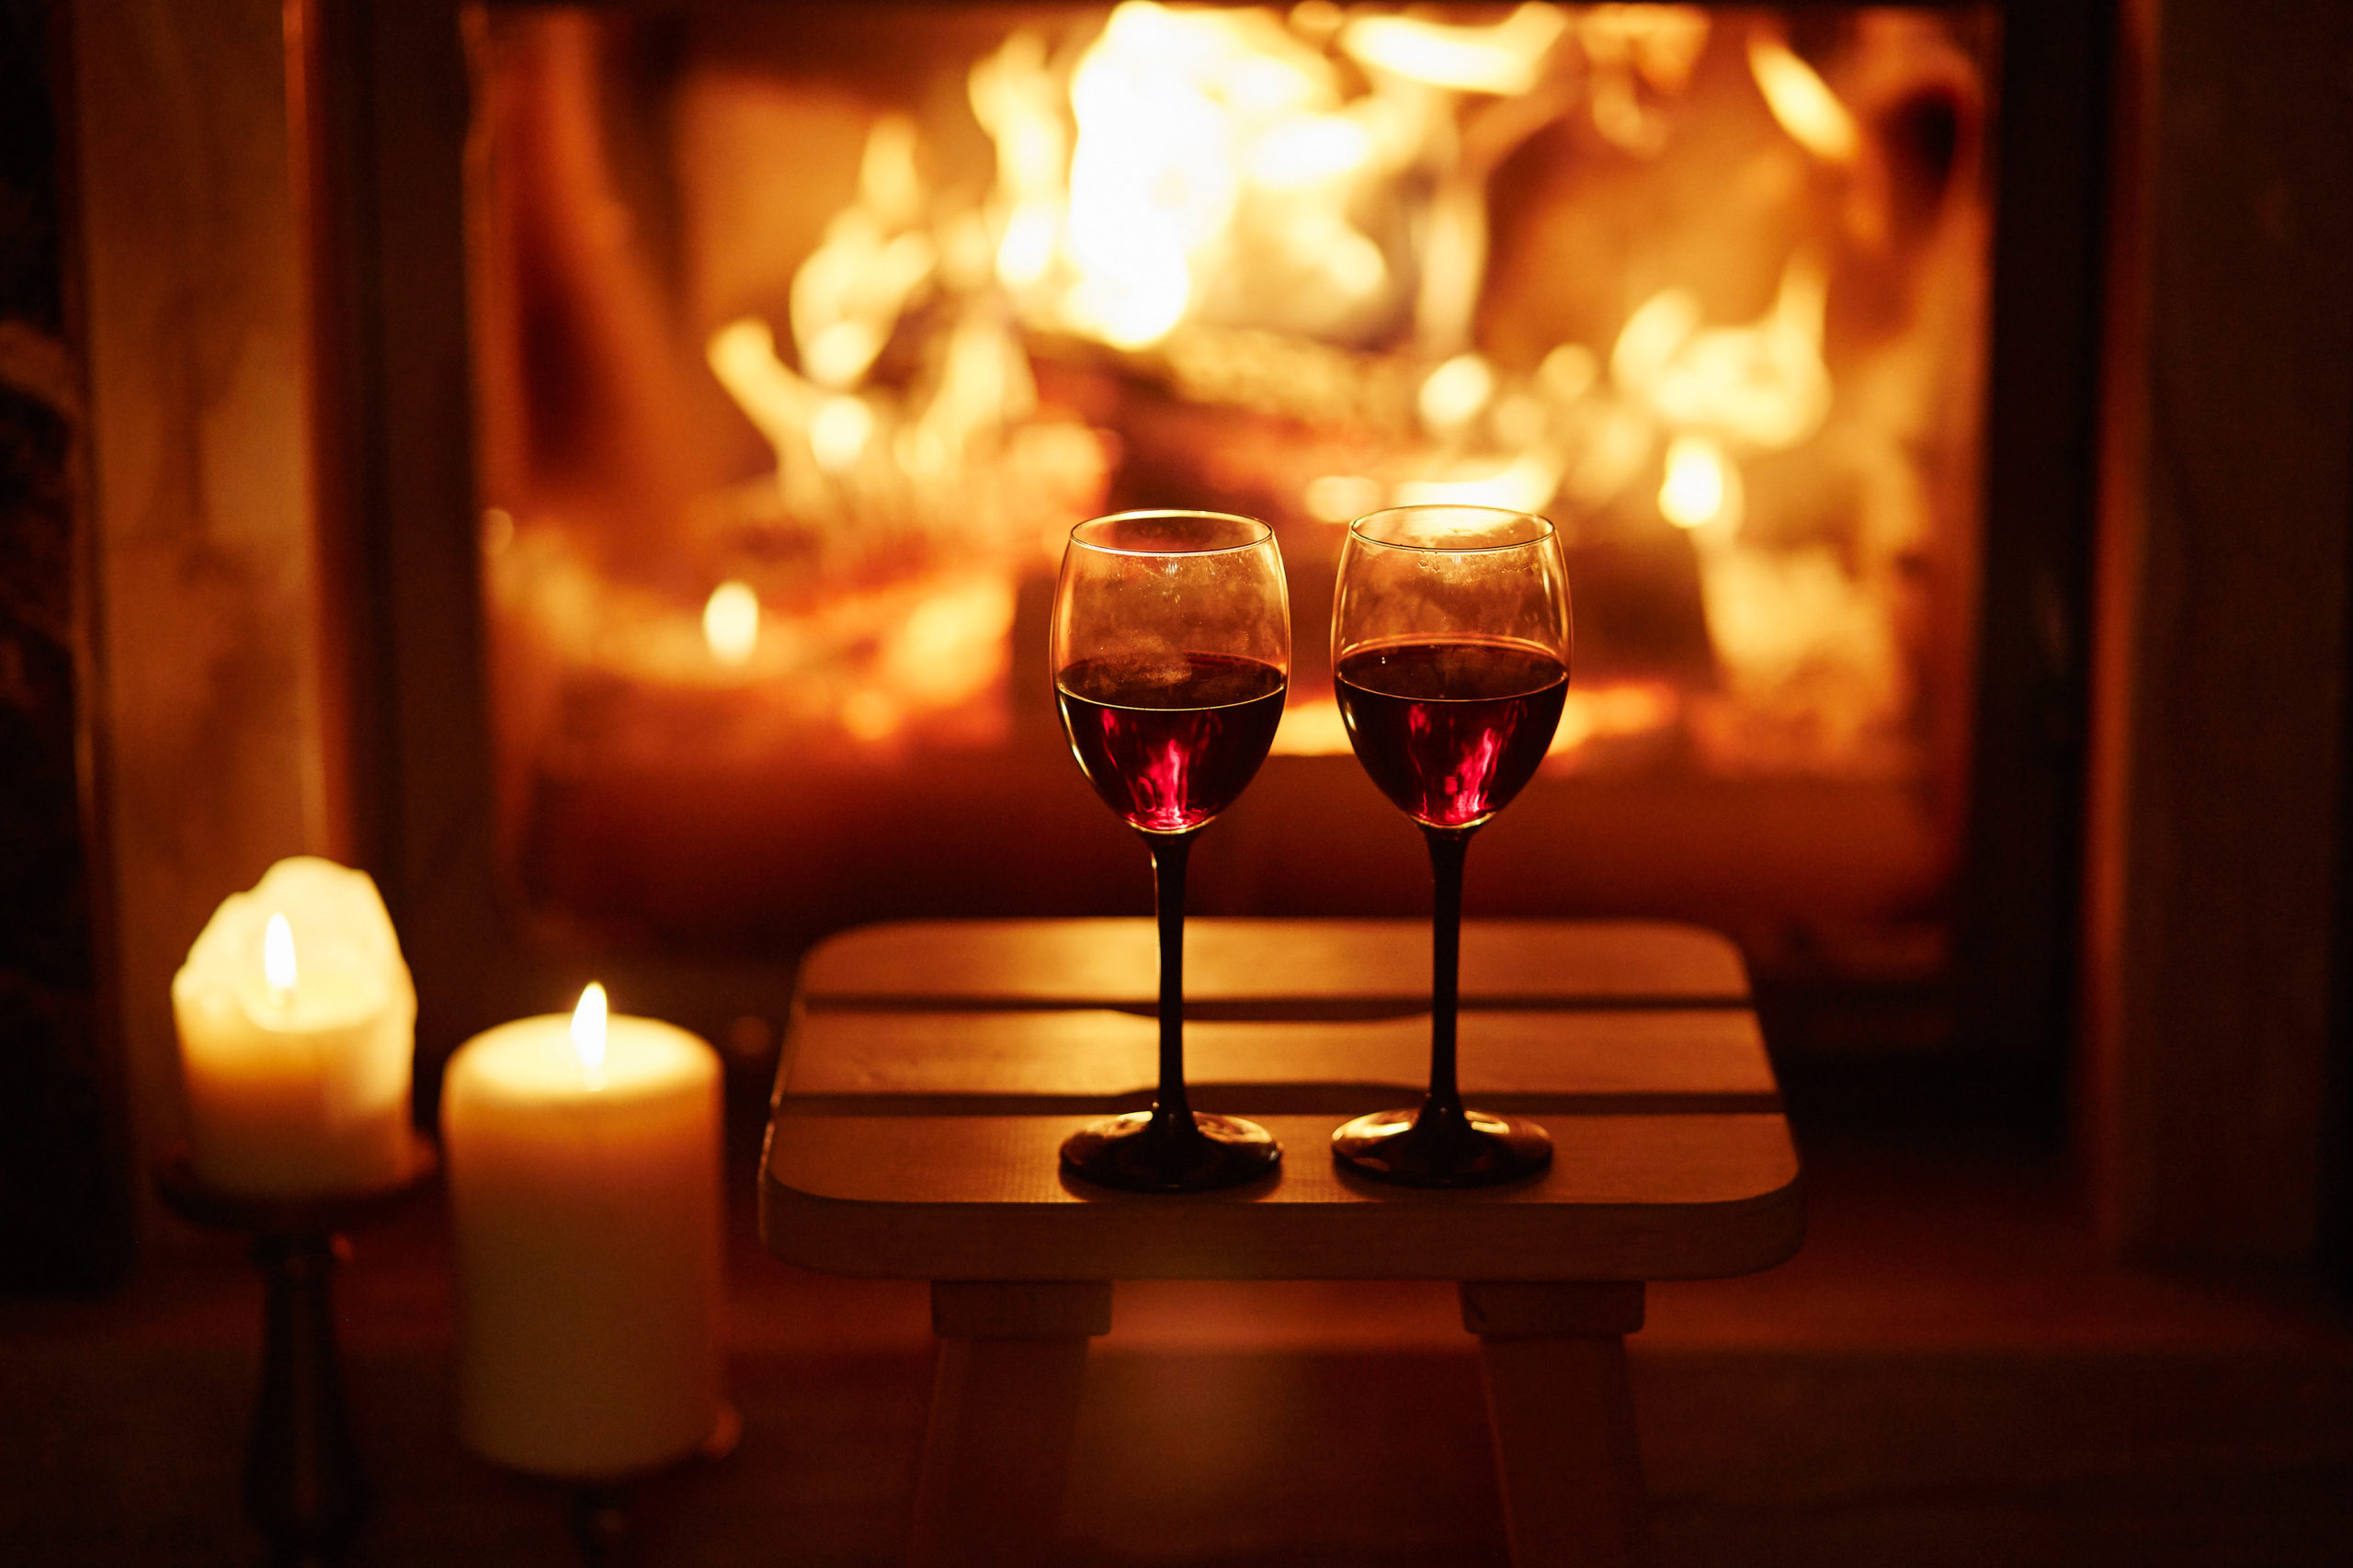 Two glasses of red wine near fireplace